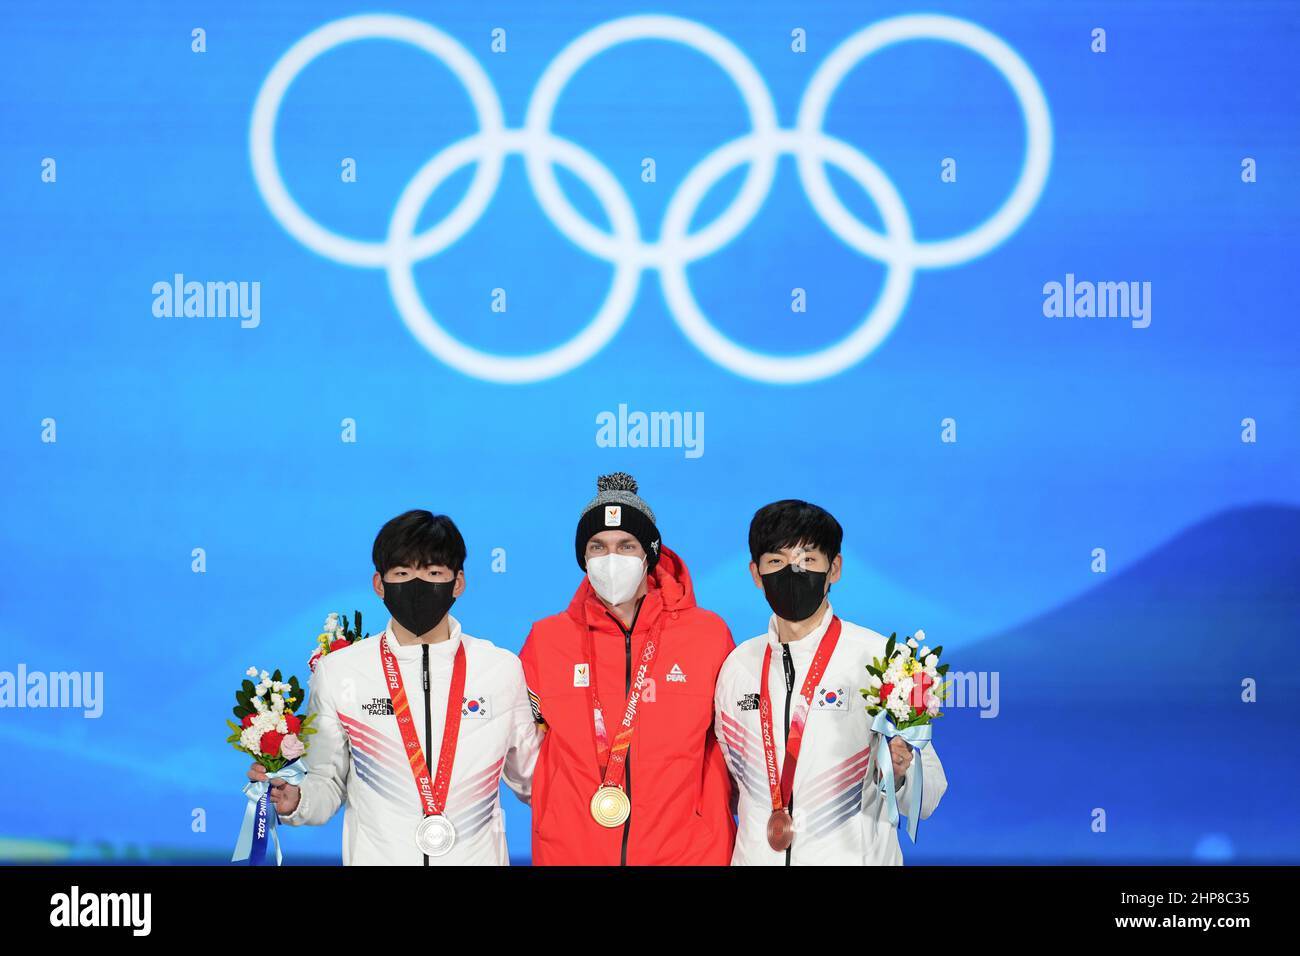 Beijing, China. 19th Feb, 2022. Gold medalist Bart Swings (C) of Belgium, silver medalist Chung Jae Won (L) of South Korea and bronze medalist Lee Seung Hoon of South Korea pose during the awarding ceremony of speed skating men's mass start at the Beijing Medals Plaza of the Winter Olympics in Beijing, capital of China, Feb. 19, 2022. Credit: Xue Yuge/Xinhua/Alamy Live News Stock Photo